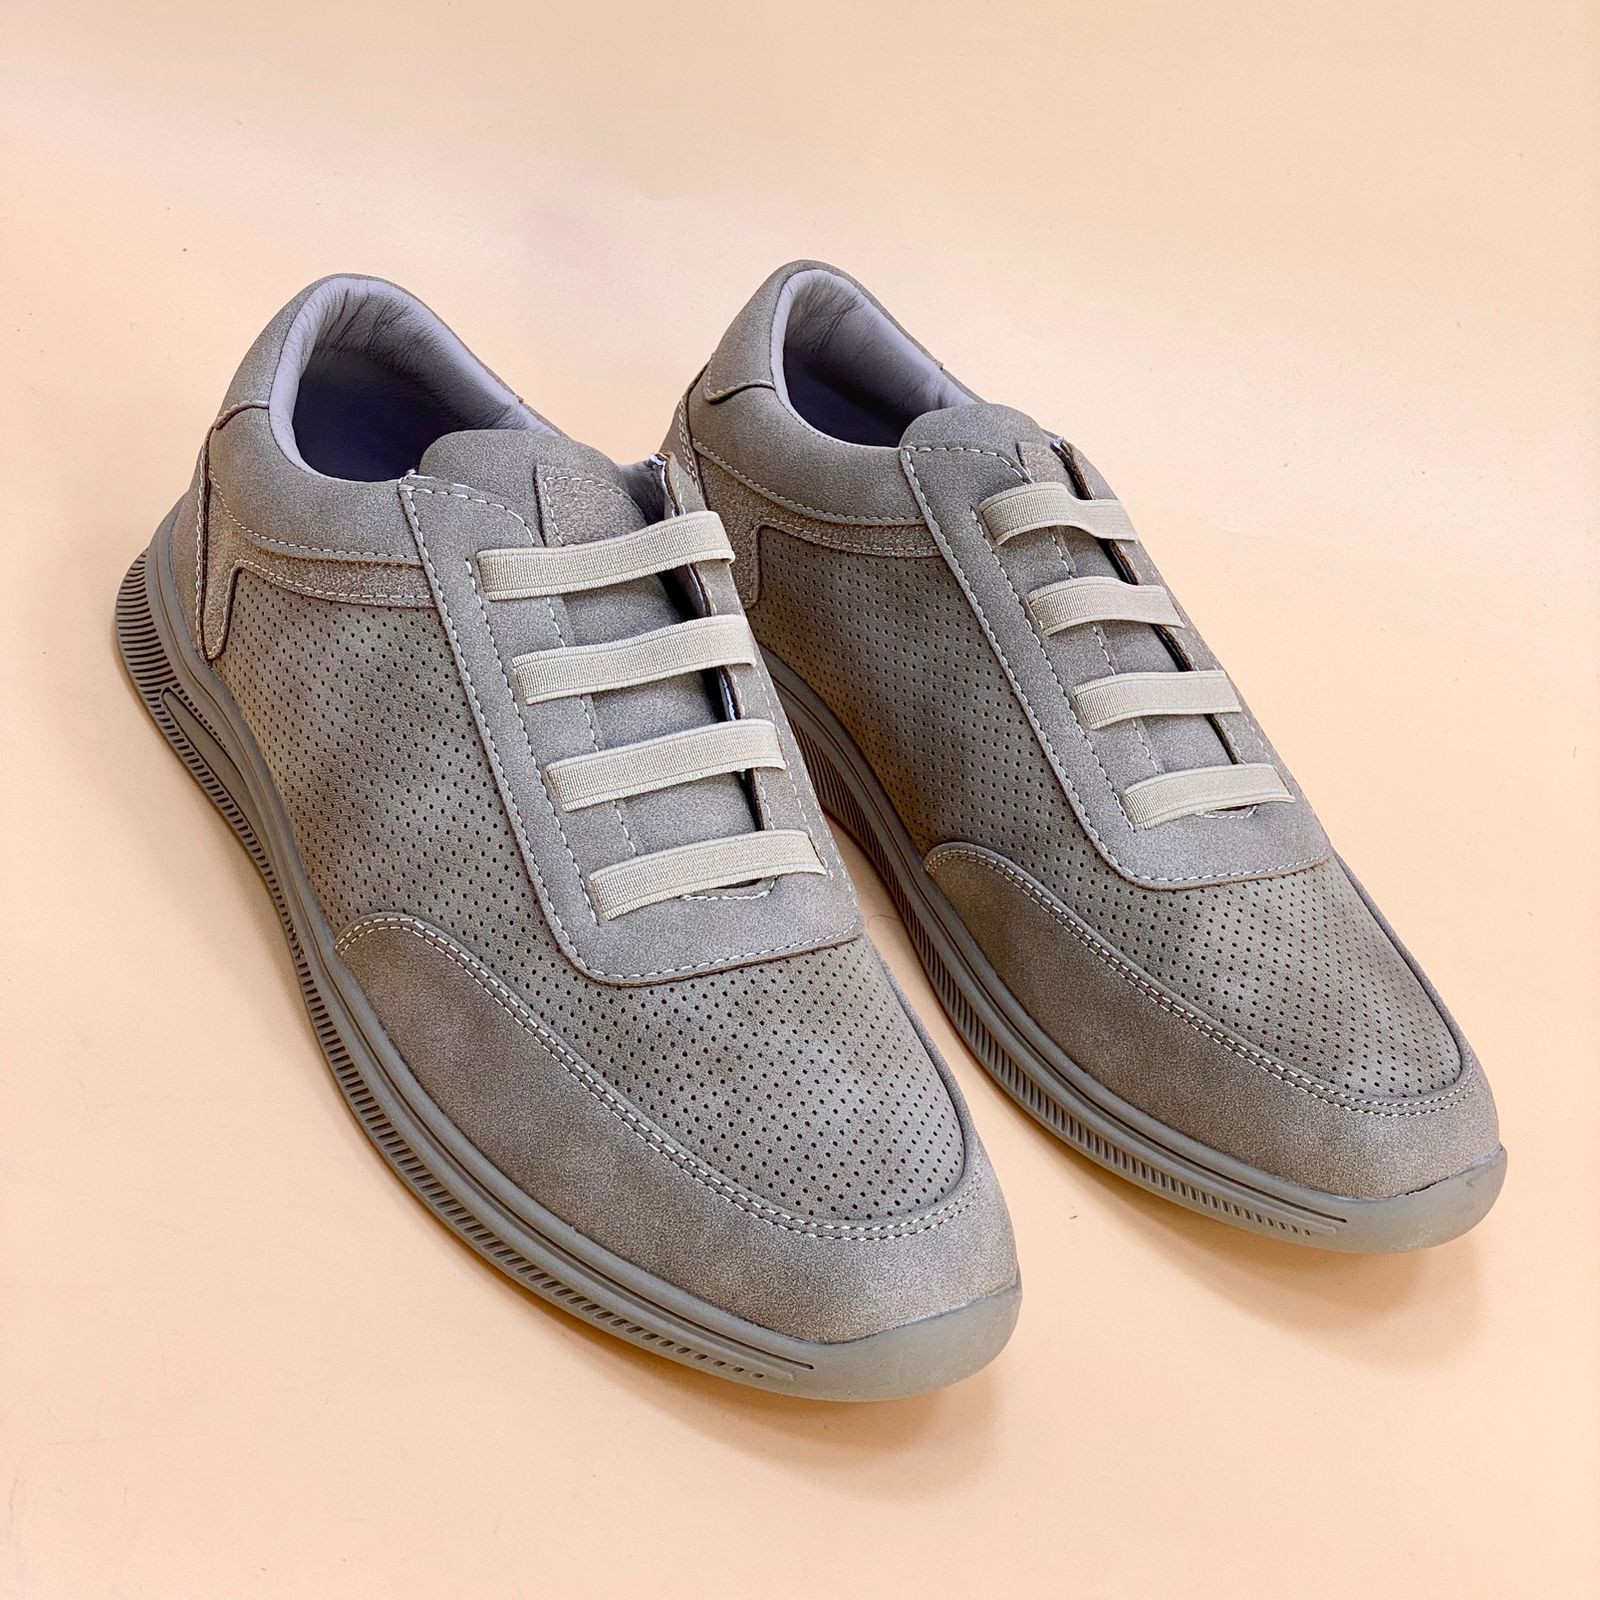 NEW ,  MEN SHOES  M185, MADE IN CHINA